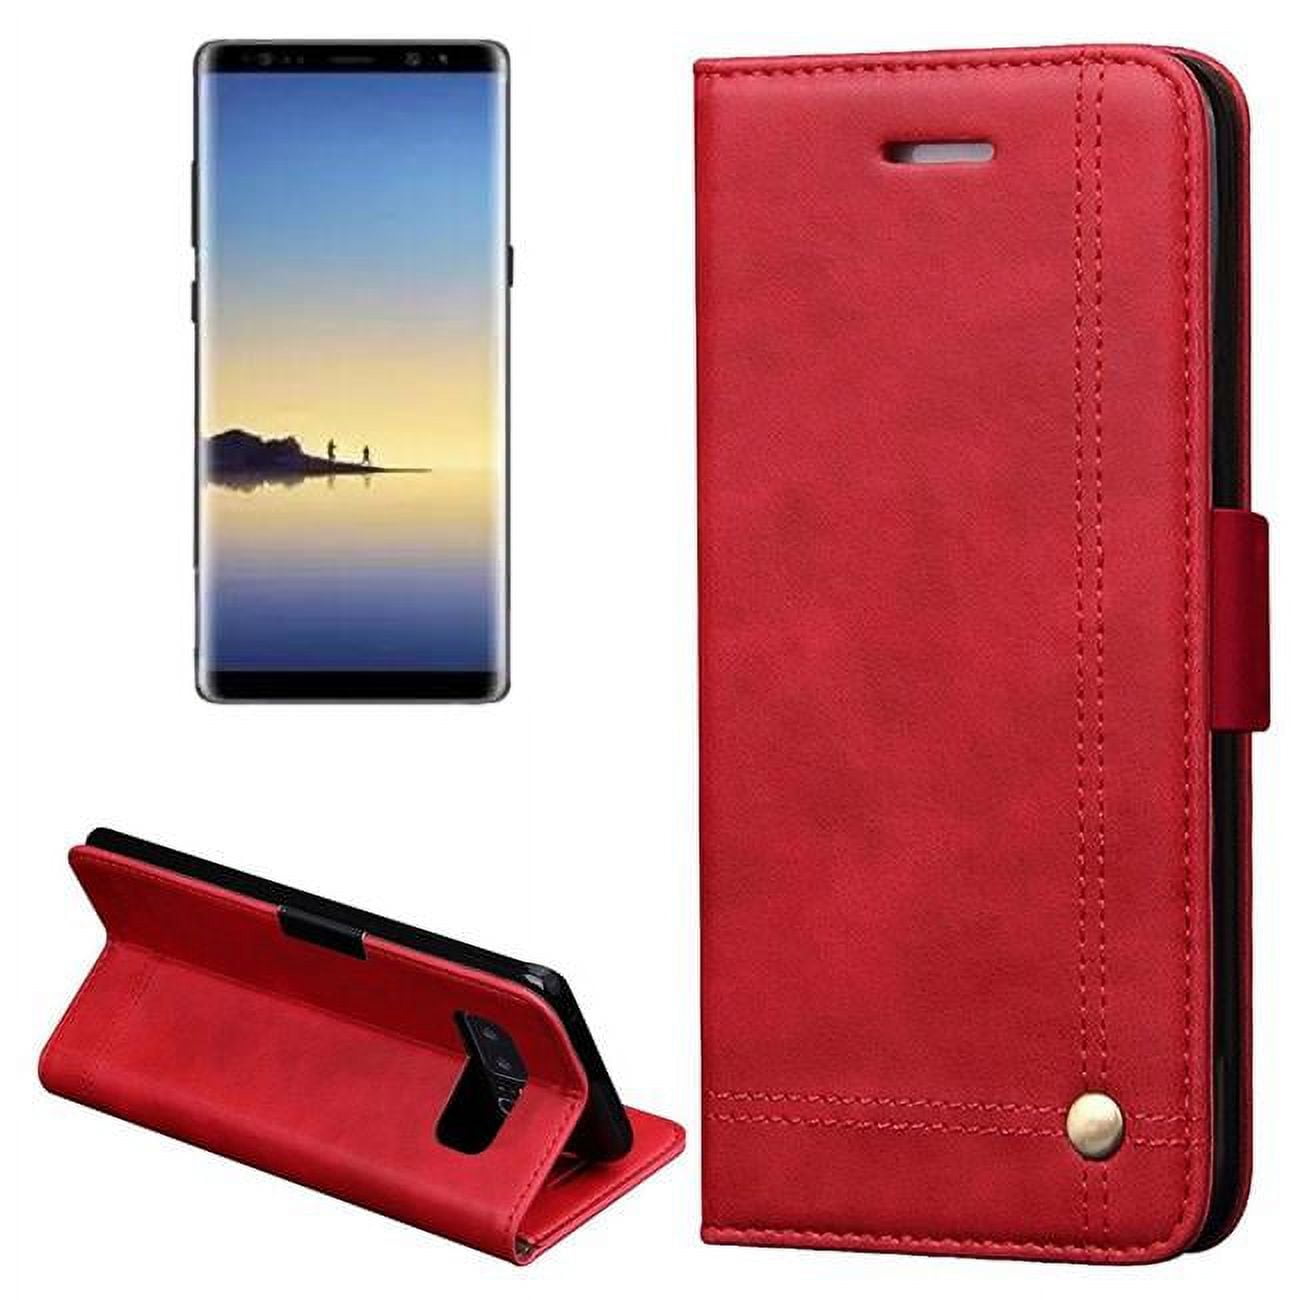 Picture of Tuff Luv I14-37 Faux Leather Book-style Stand Case Cover for Samsung Galaxy Note 8 - Red